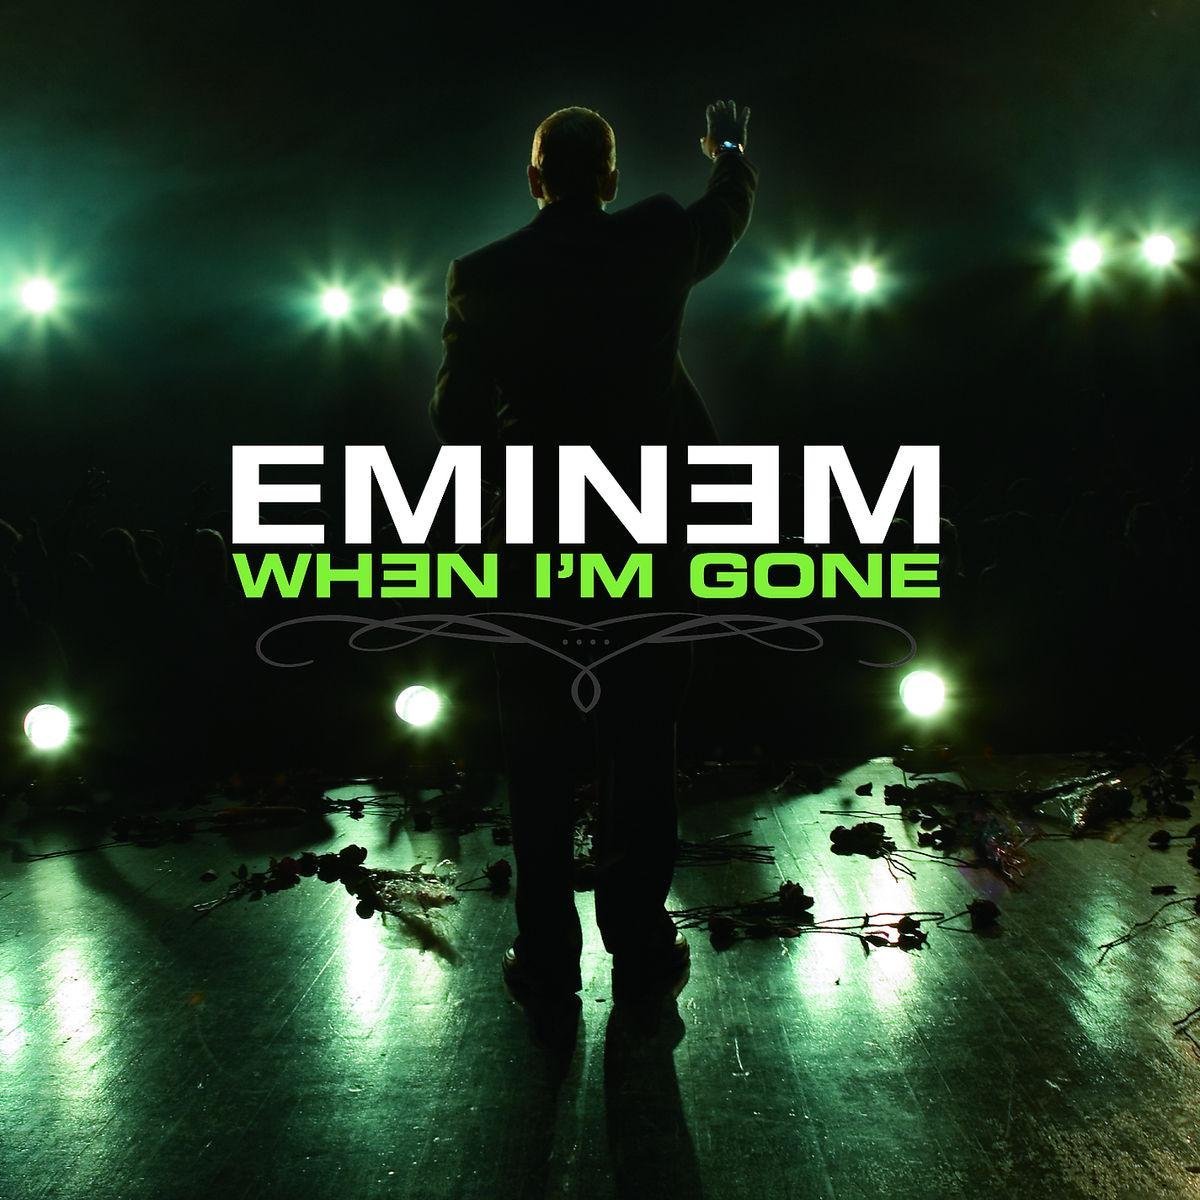 eminem songs free mp3 download